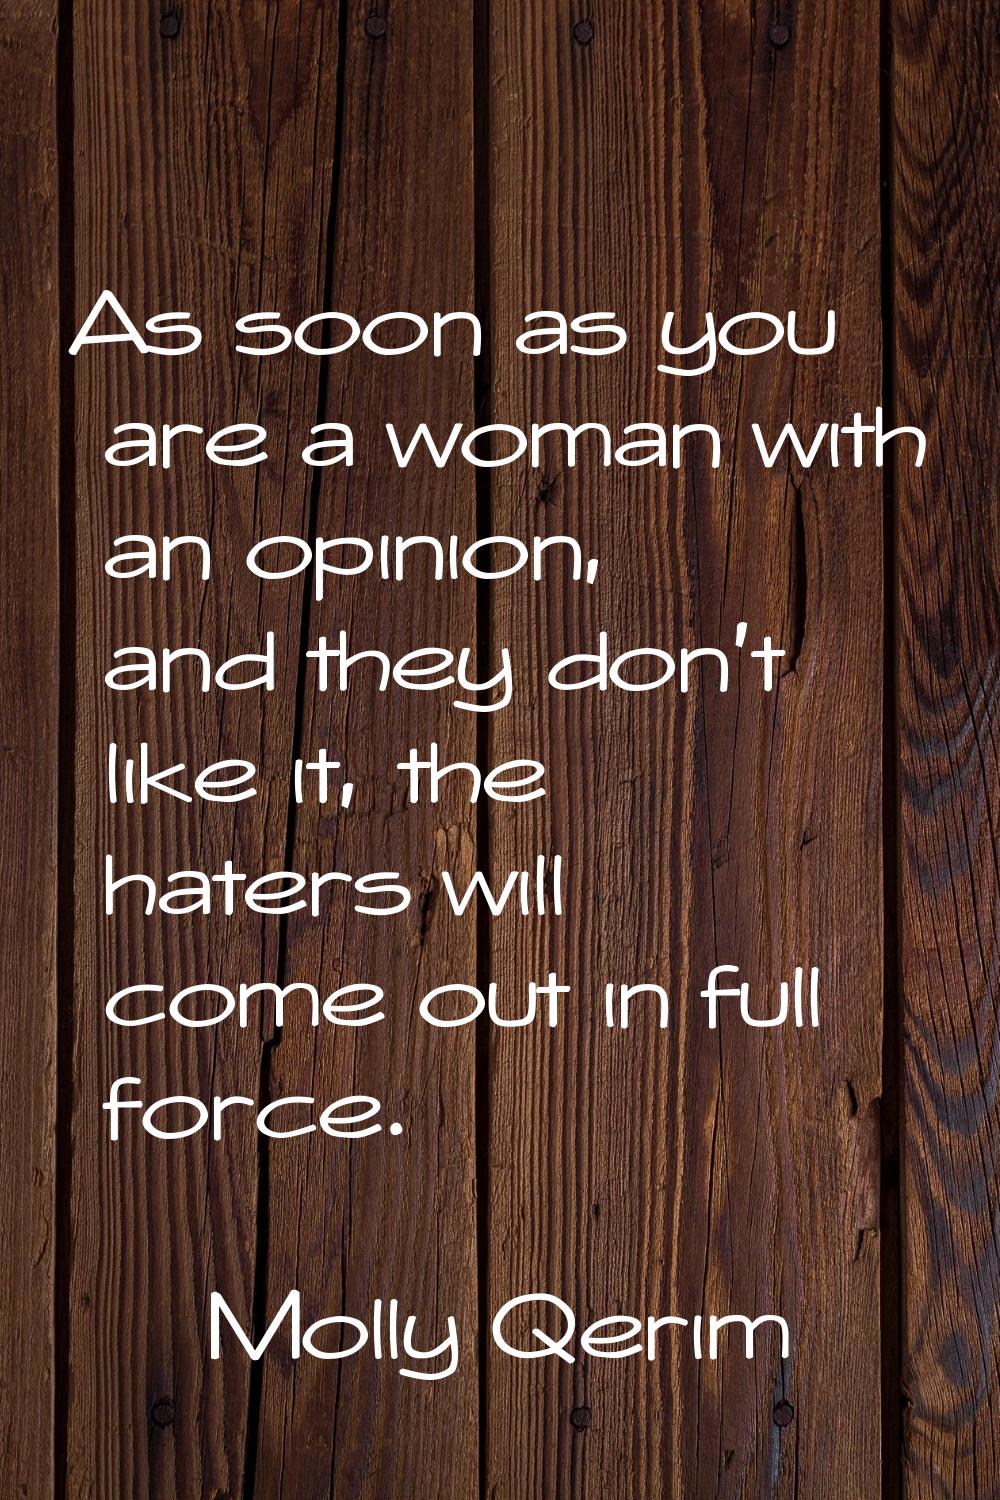 As soon as you are a woman with an opinion, and they don't like it, the haters will come out in ful